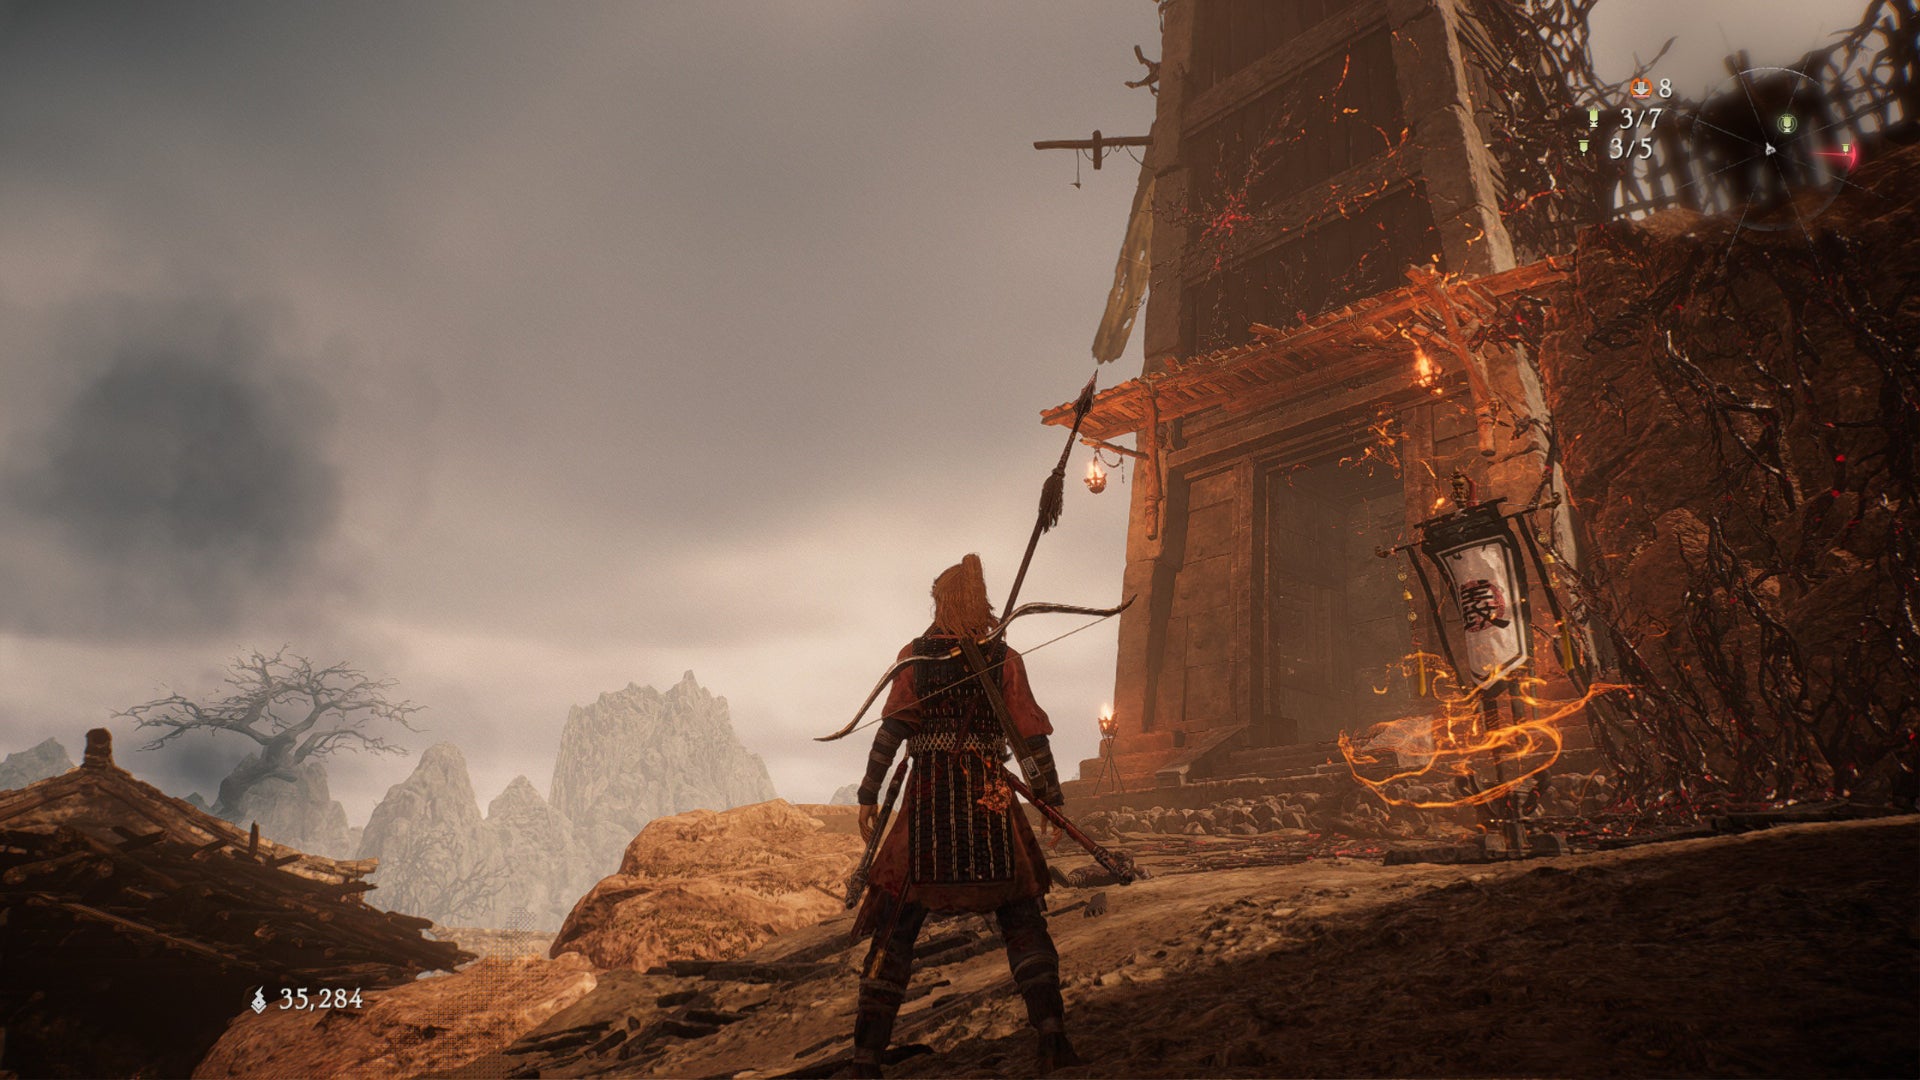 A Wo Long: Fallen Dynasty screenshot of the player standing next to a flag.